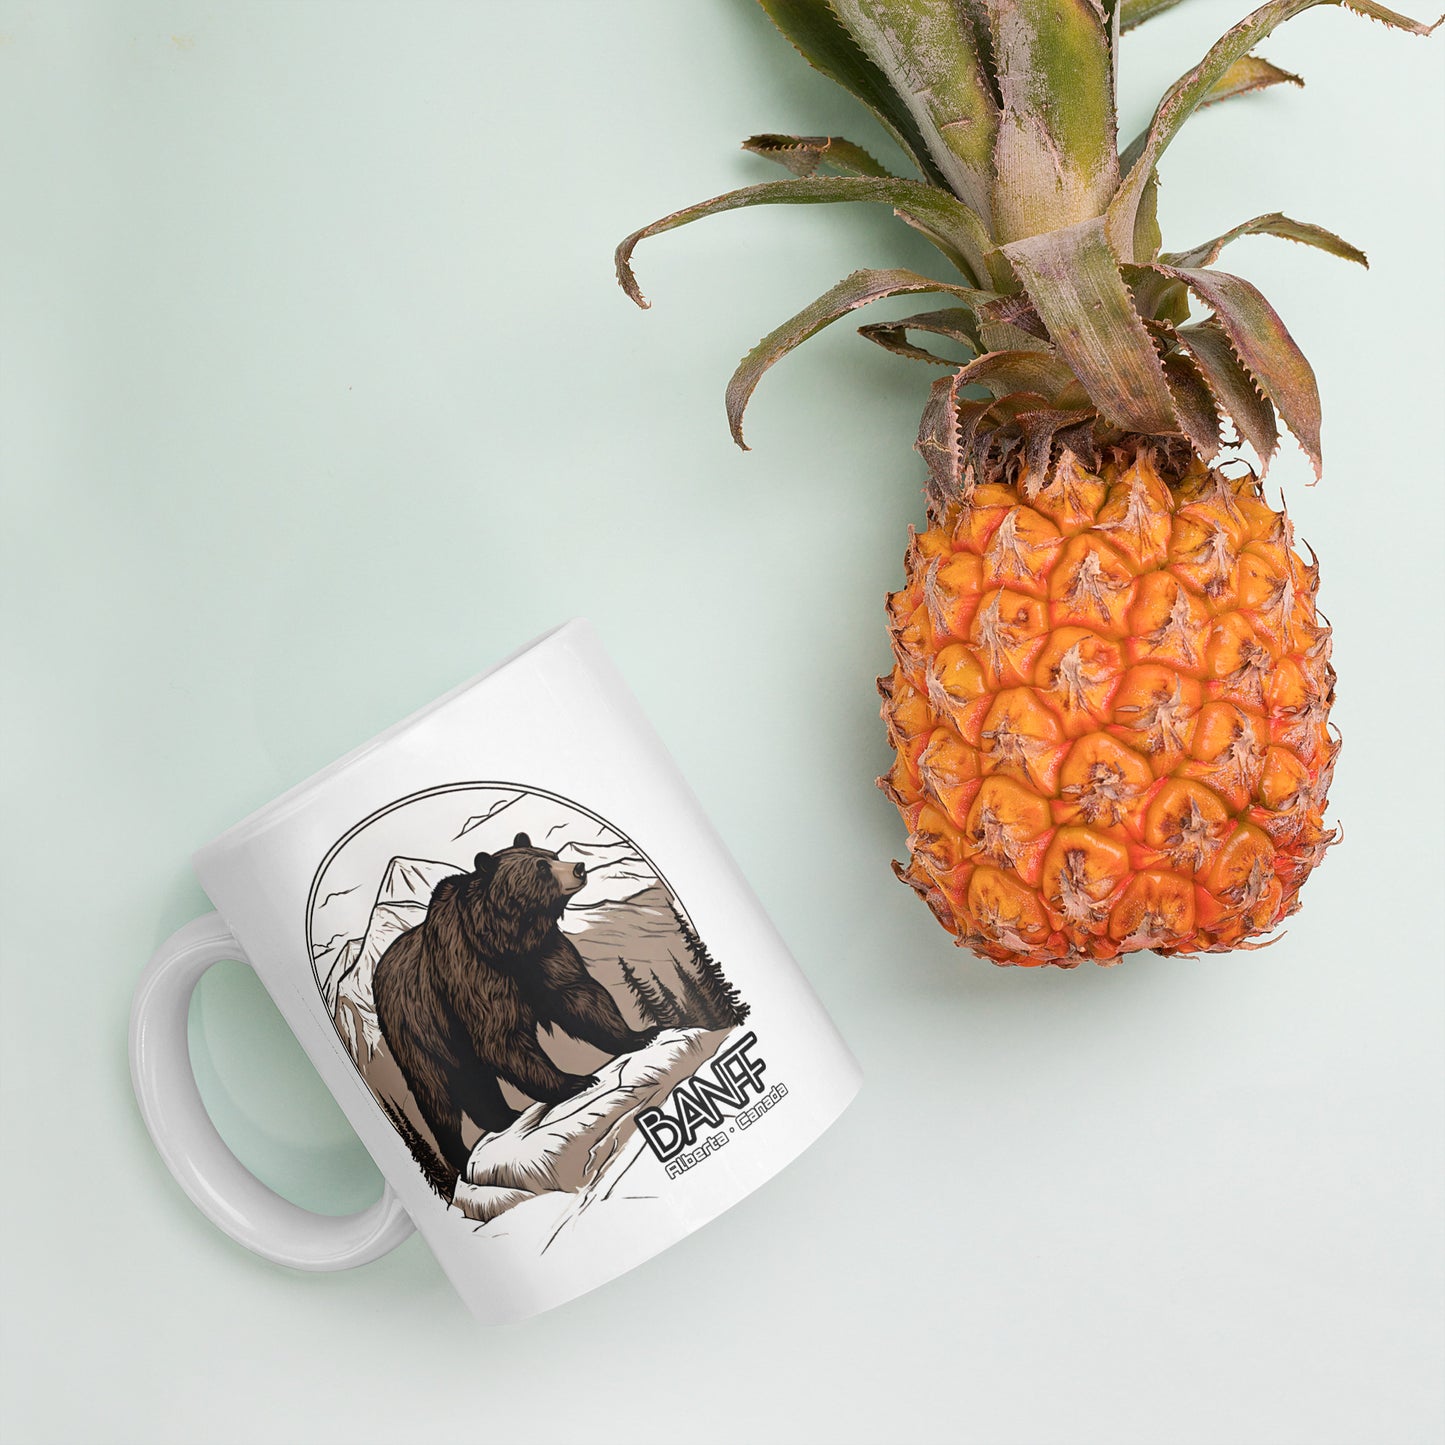 The Great Banff Grizzly | 'True North' | White Glossy Mug